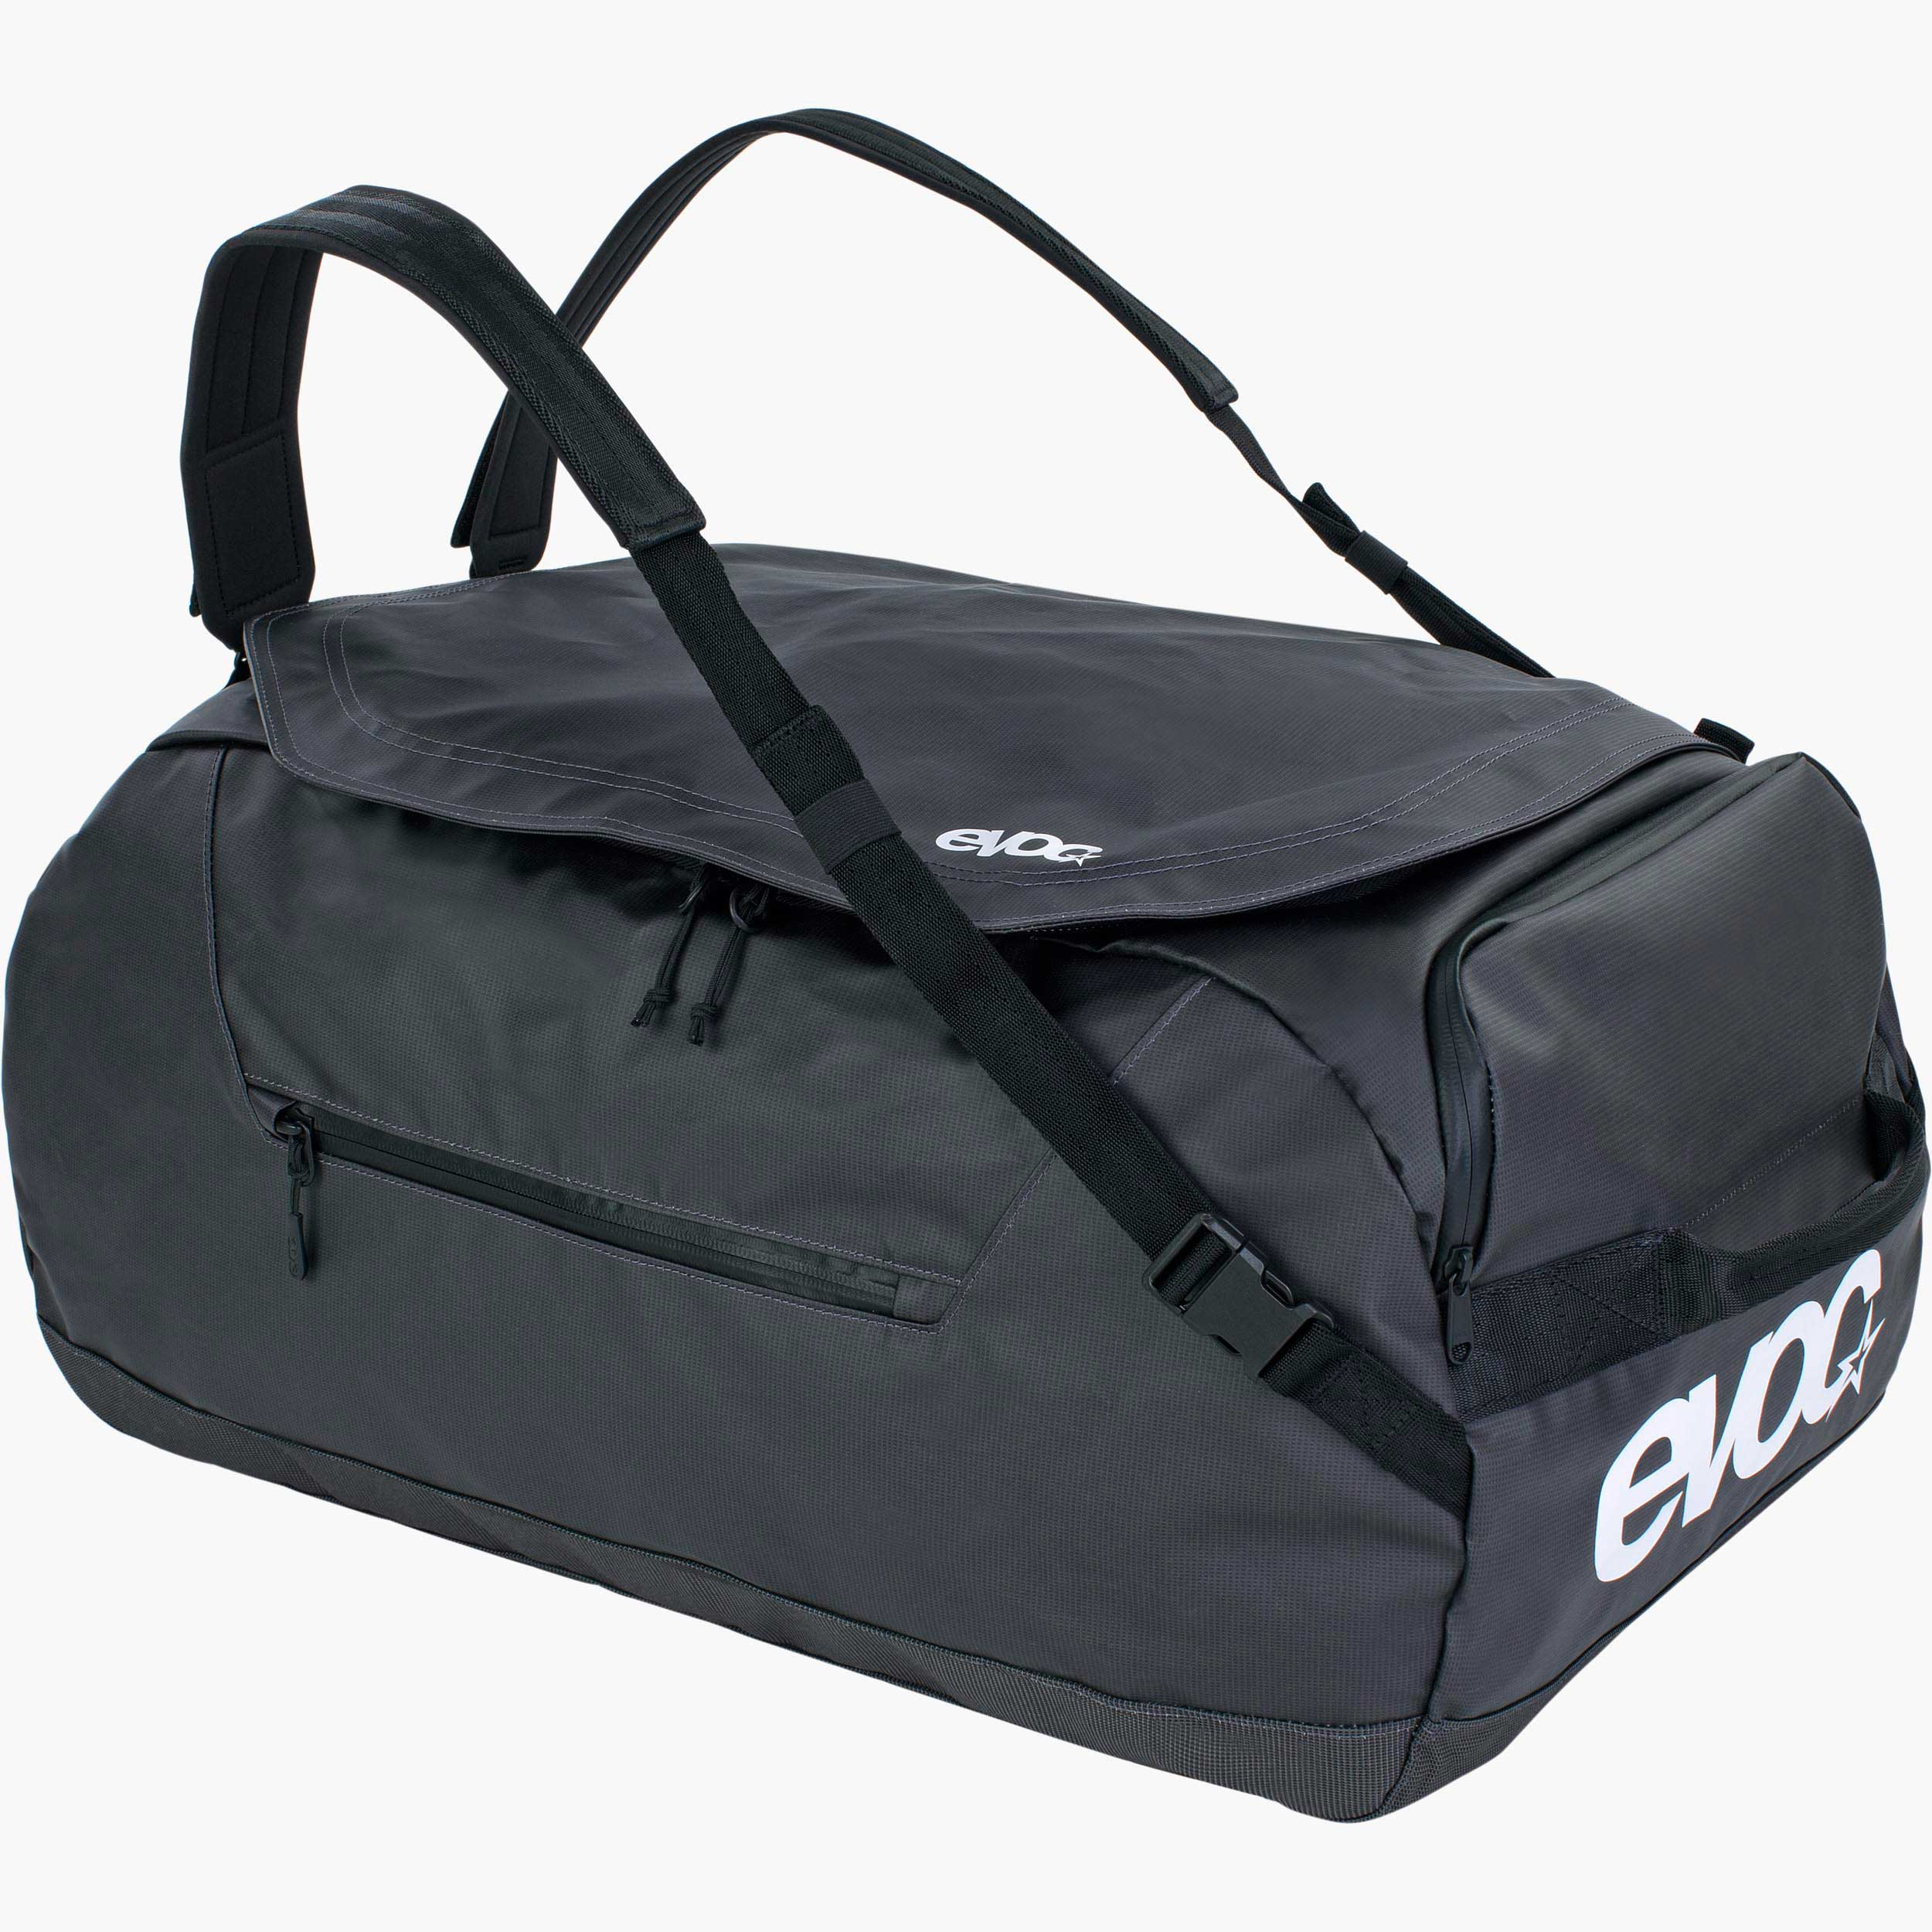 Blair Sports Duffle Bag in Misty Pink – The815.Co-saigonsouth.com.vn